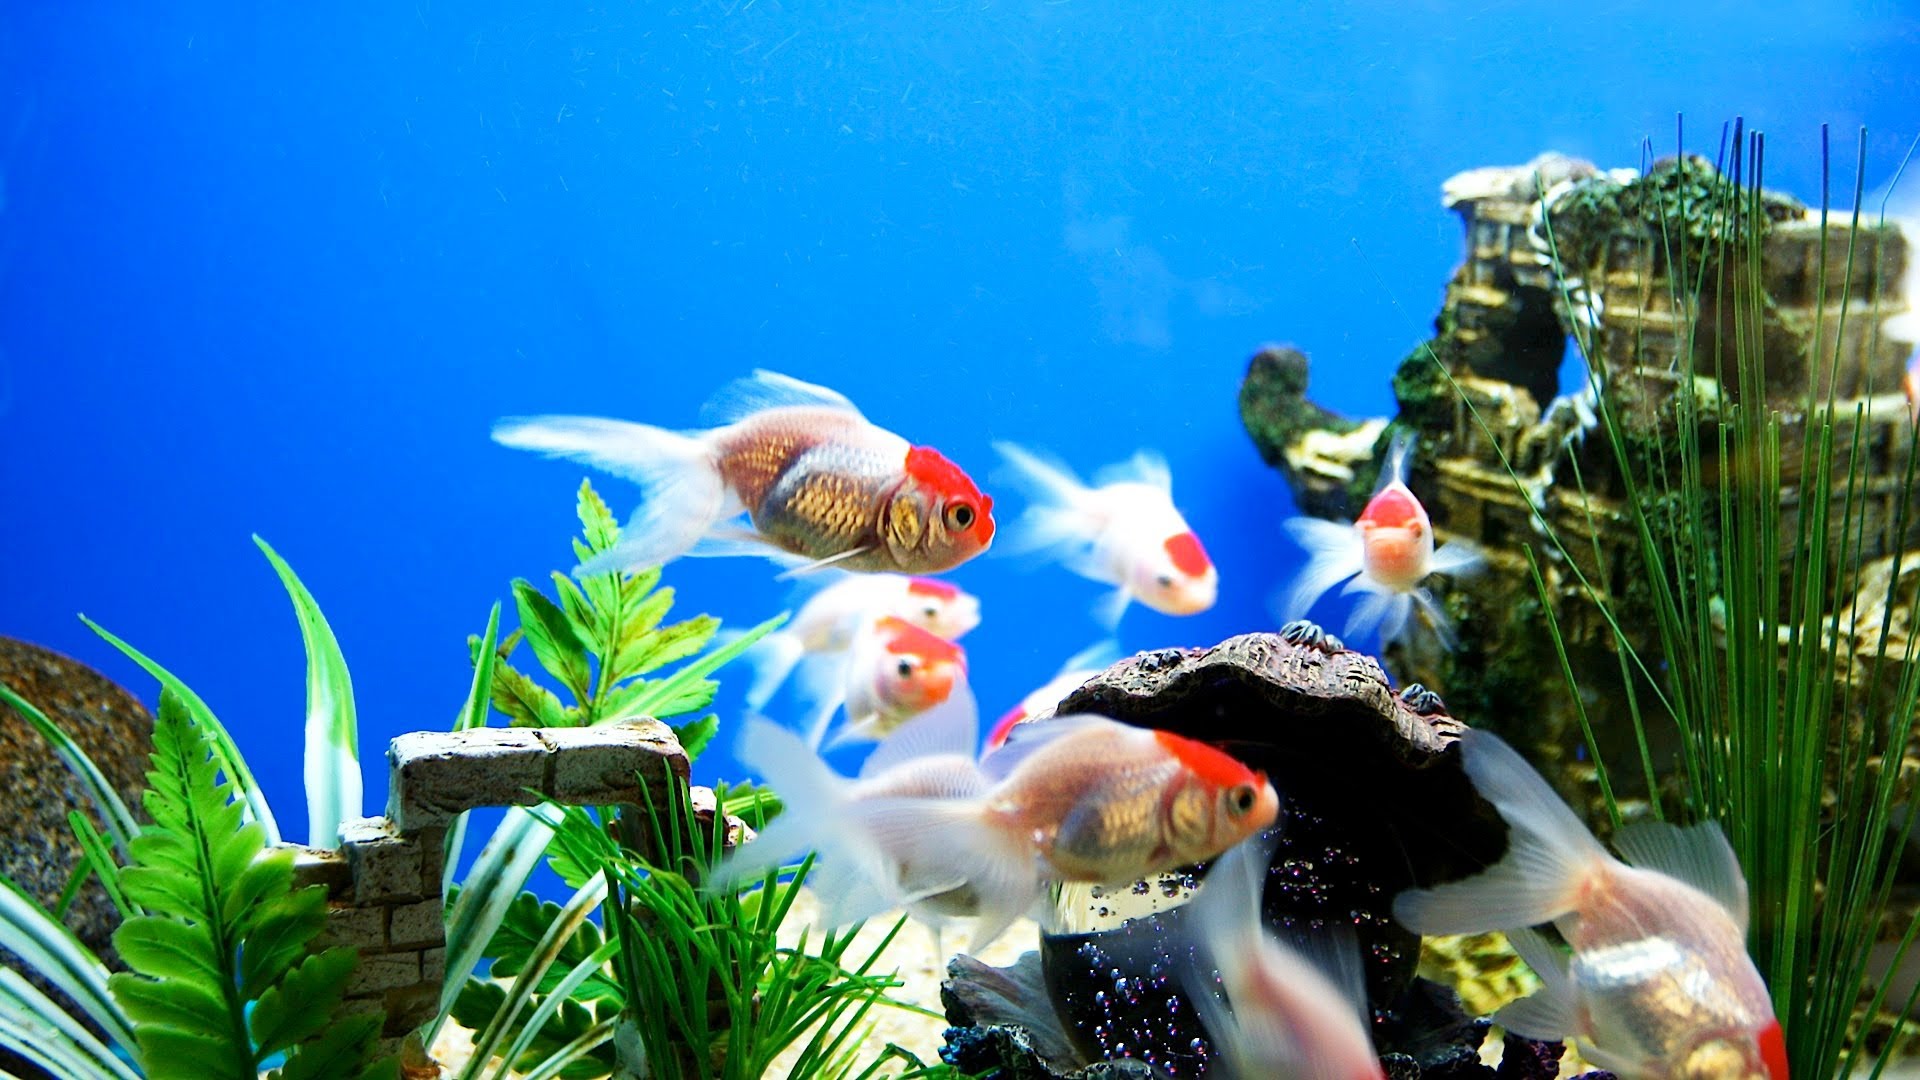 What to Look For in a Good Fish Store